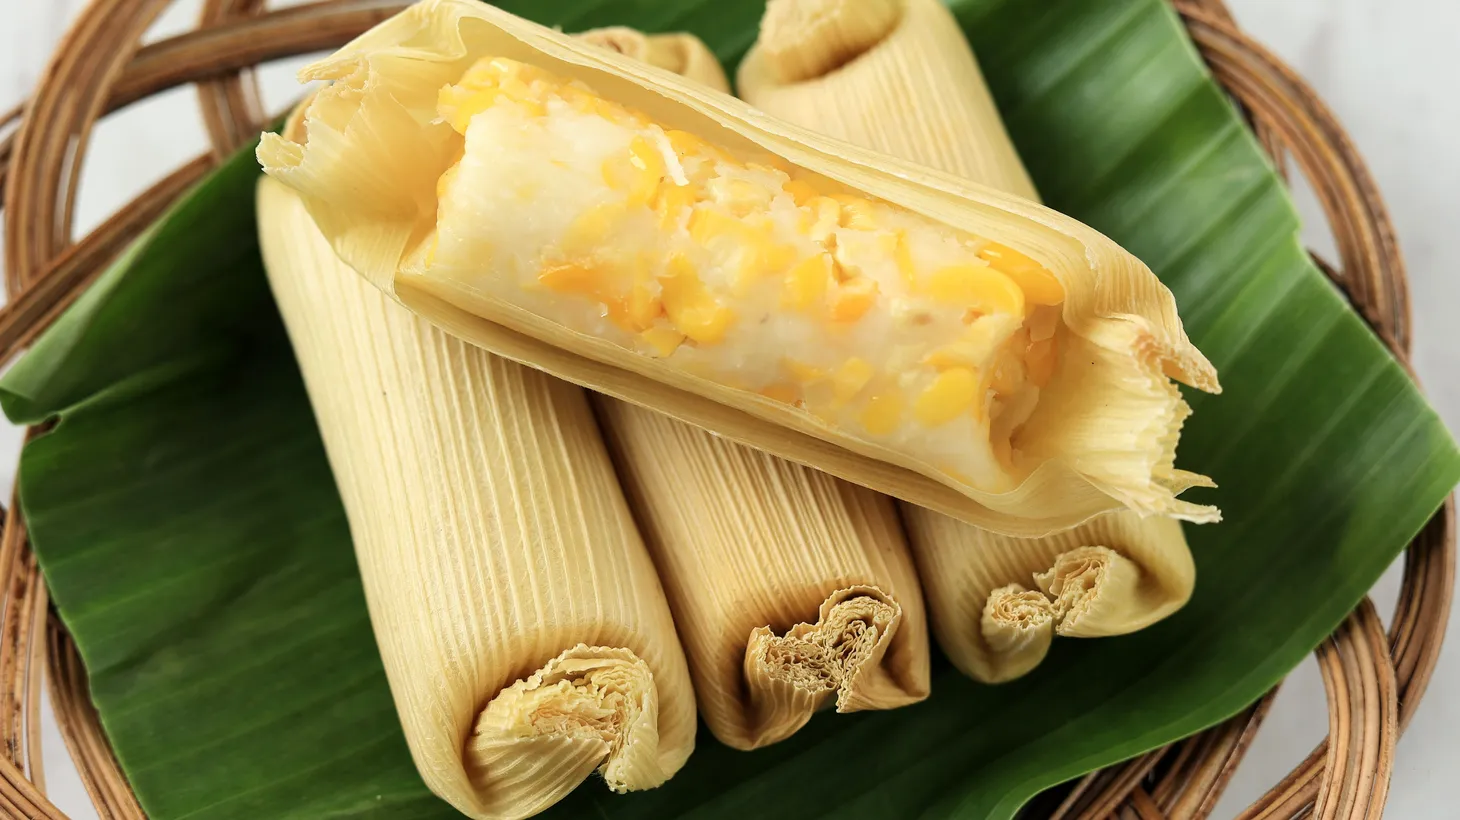 Tamales offer a sense of togetherness to families and friends during the holidays.